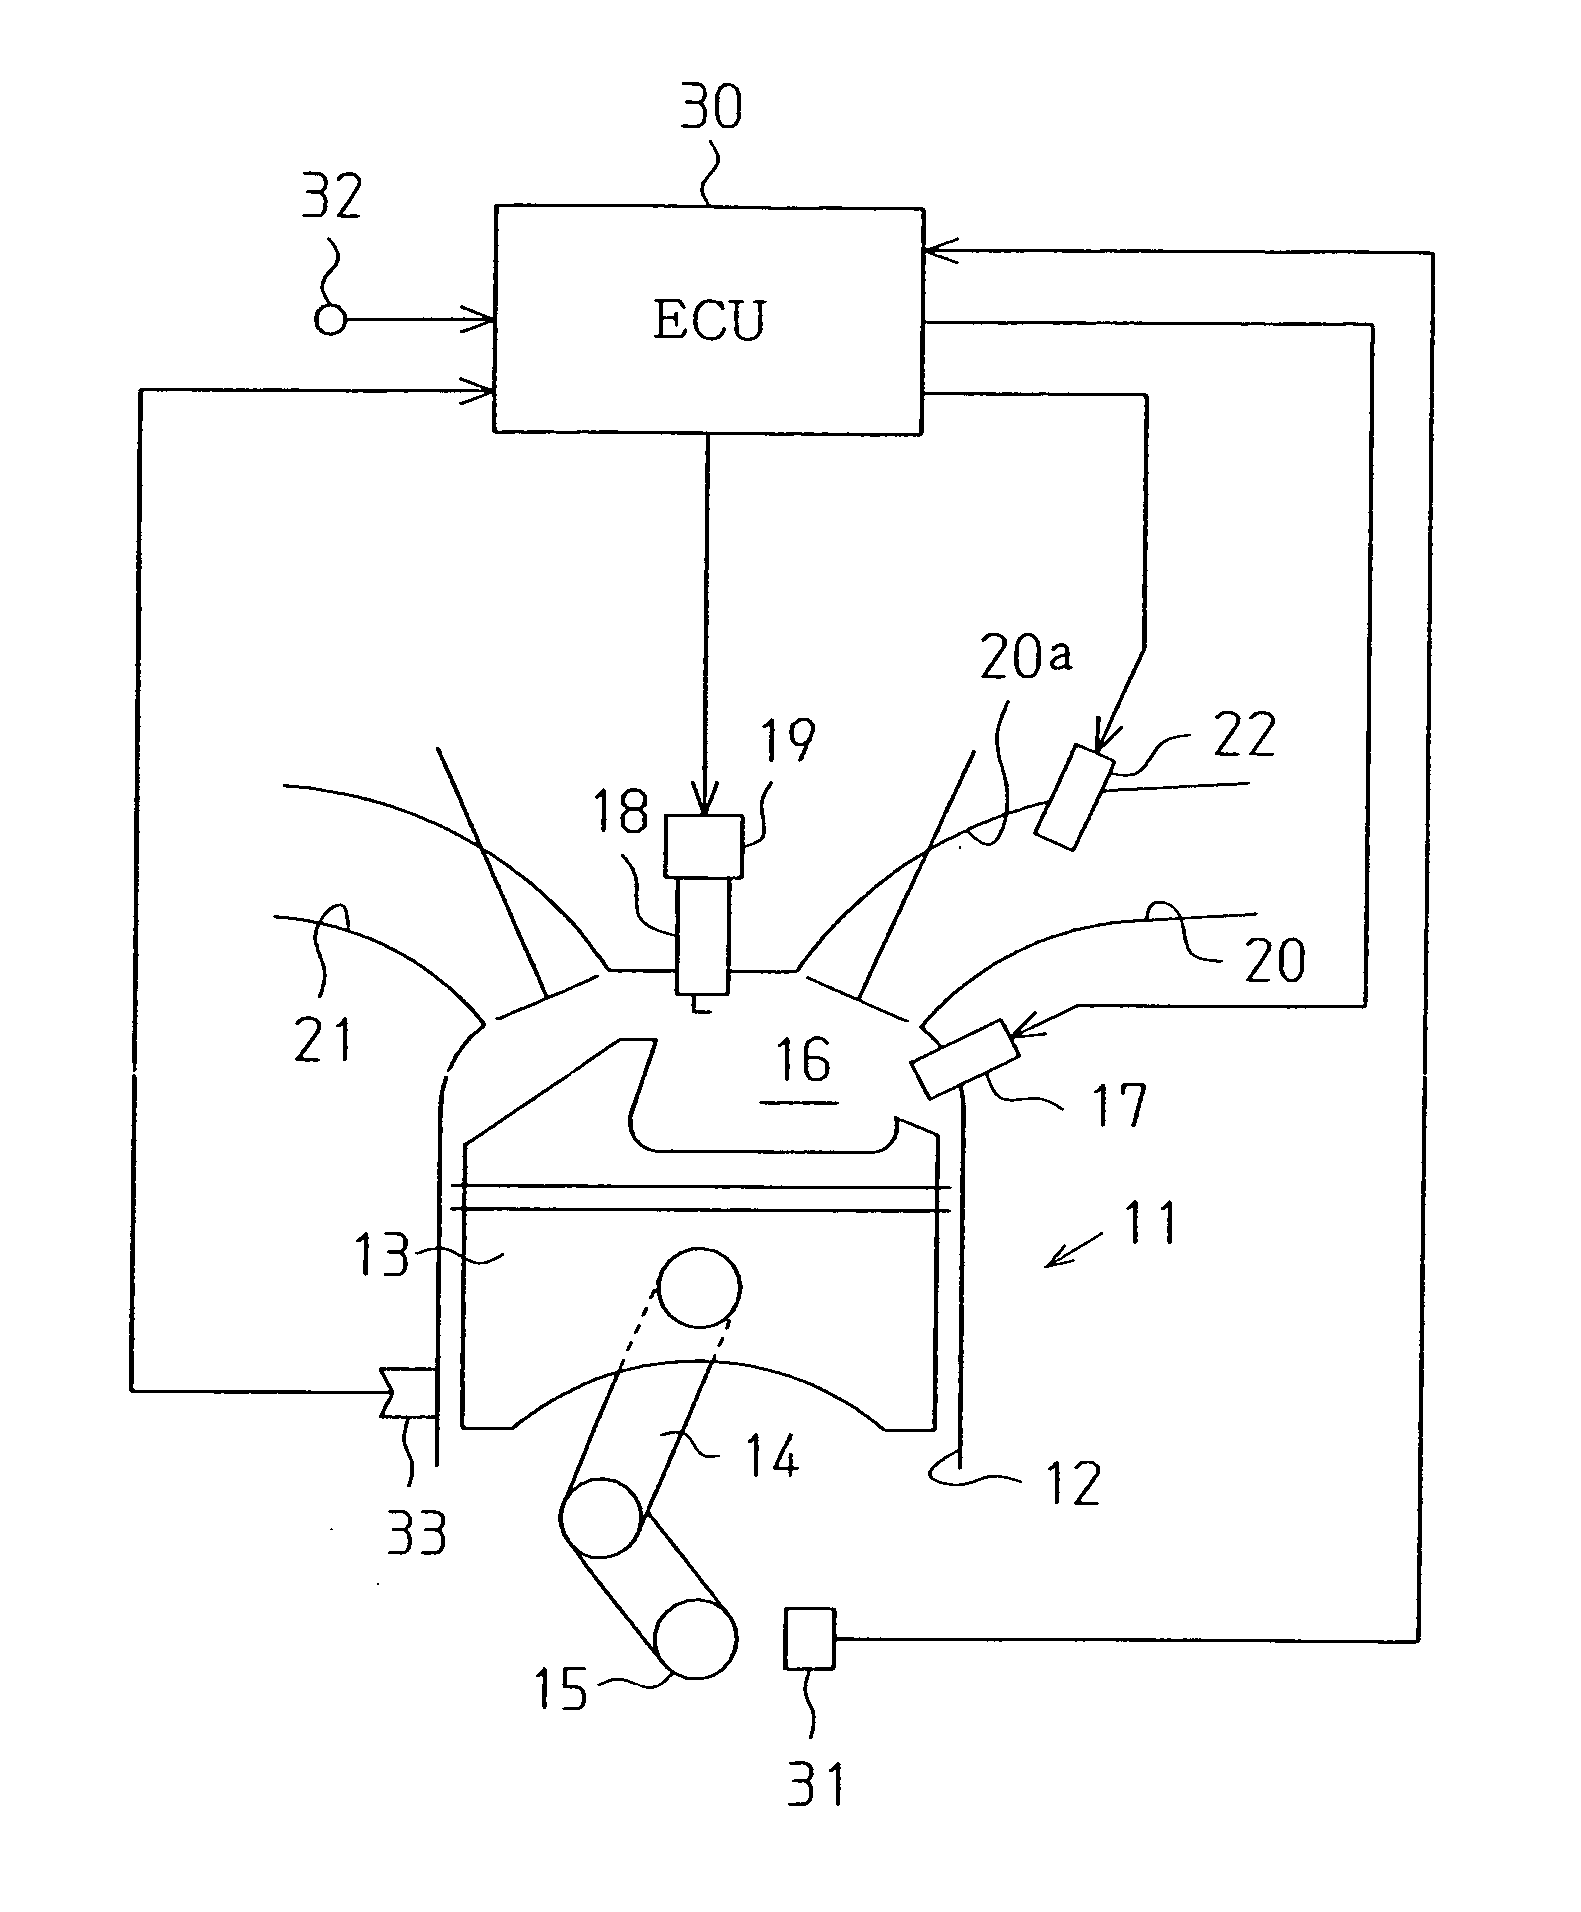 Knocking determination apparatus for internal combustion engine